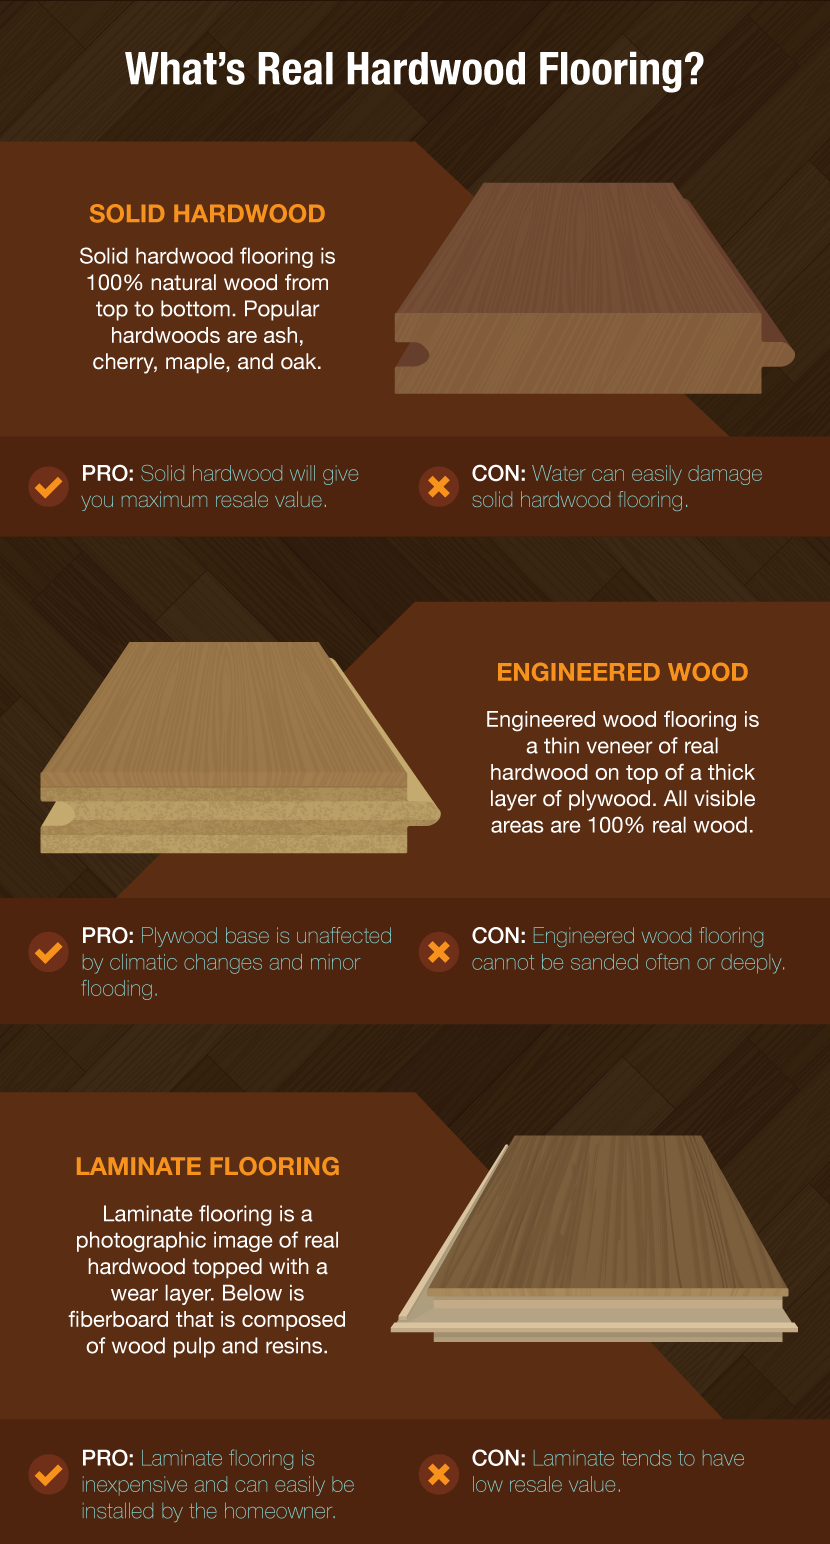 How To Protect Your Hardwood Floors, Does Engineered Hardwood Floors Scratch Easily